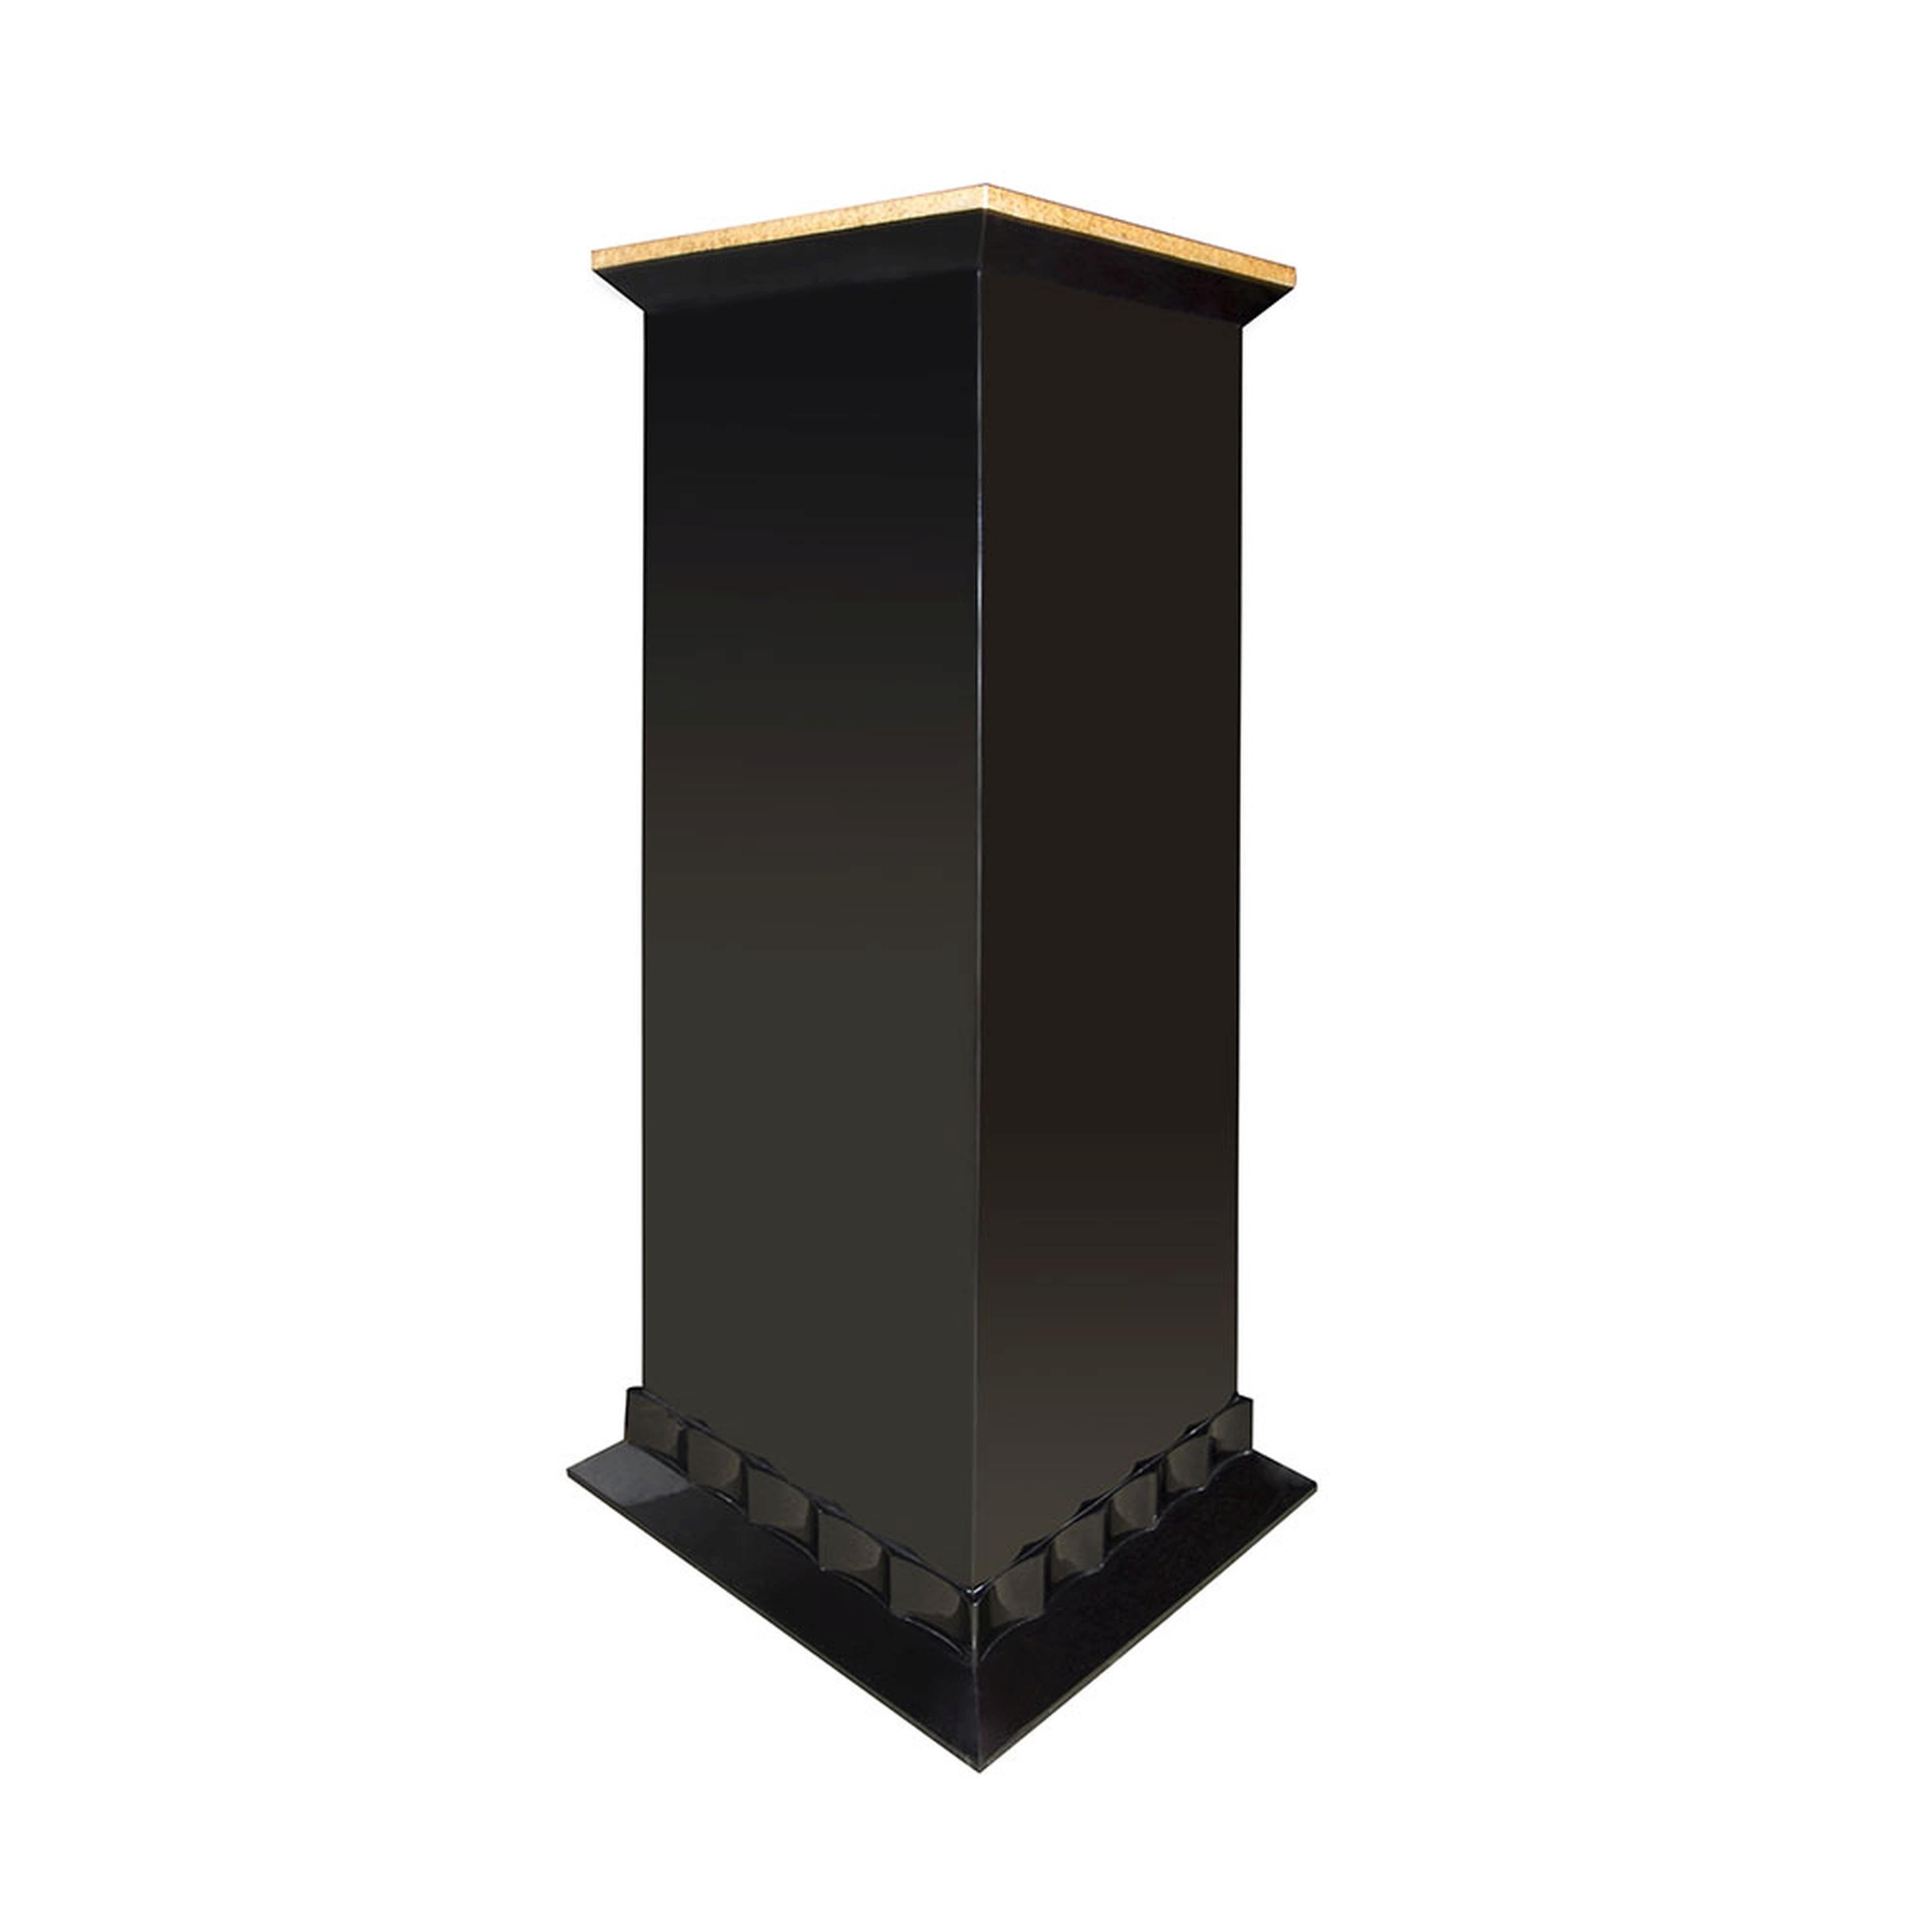 The Marmont pedestal, complementary in design to the Marmont console, is a handsome way to add a touch of sophistication to any room. The detailed base features an intricately scalloped edge. A sleek pillar supports the showcase top, a perfect